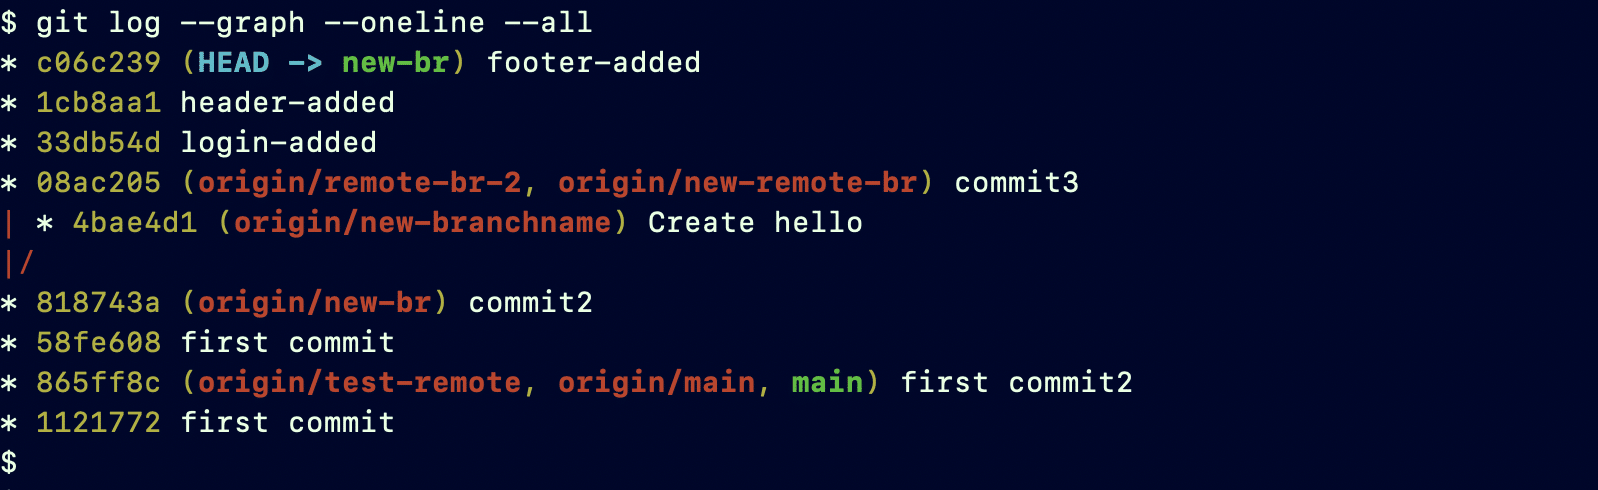 Step #2 Check the git log for the commit history